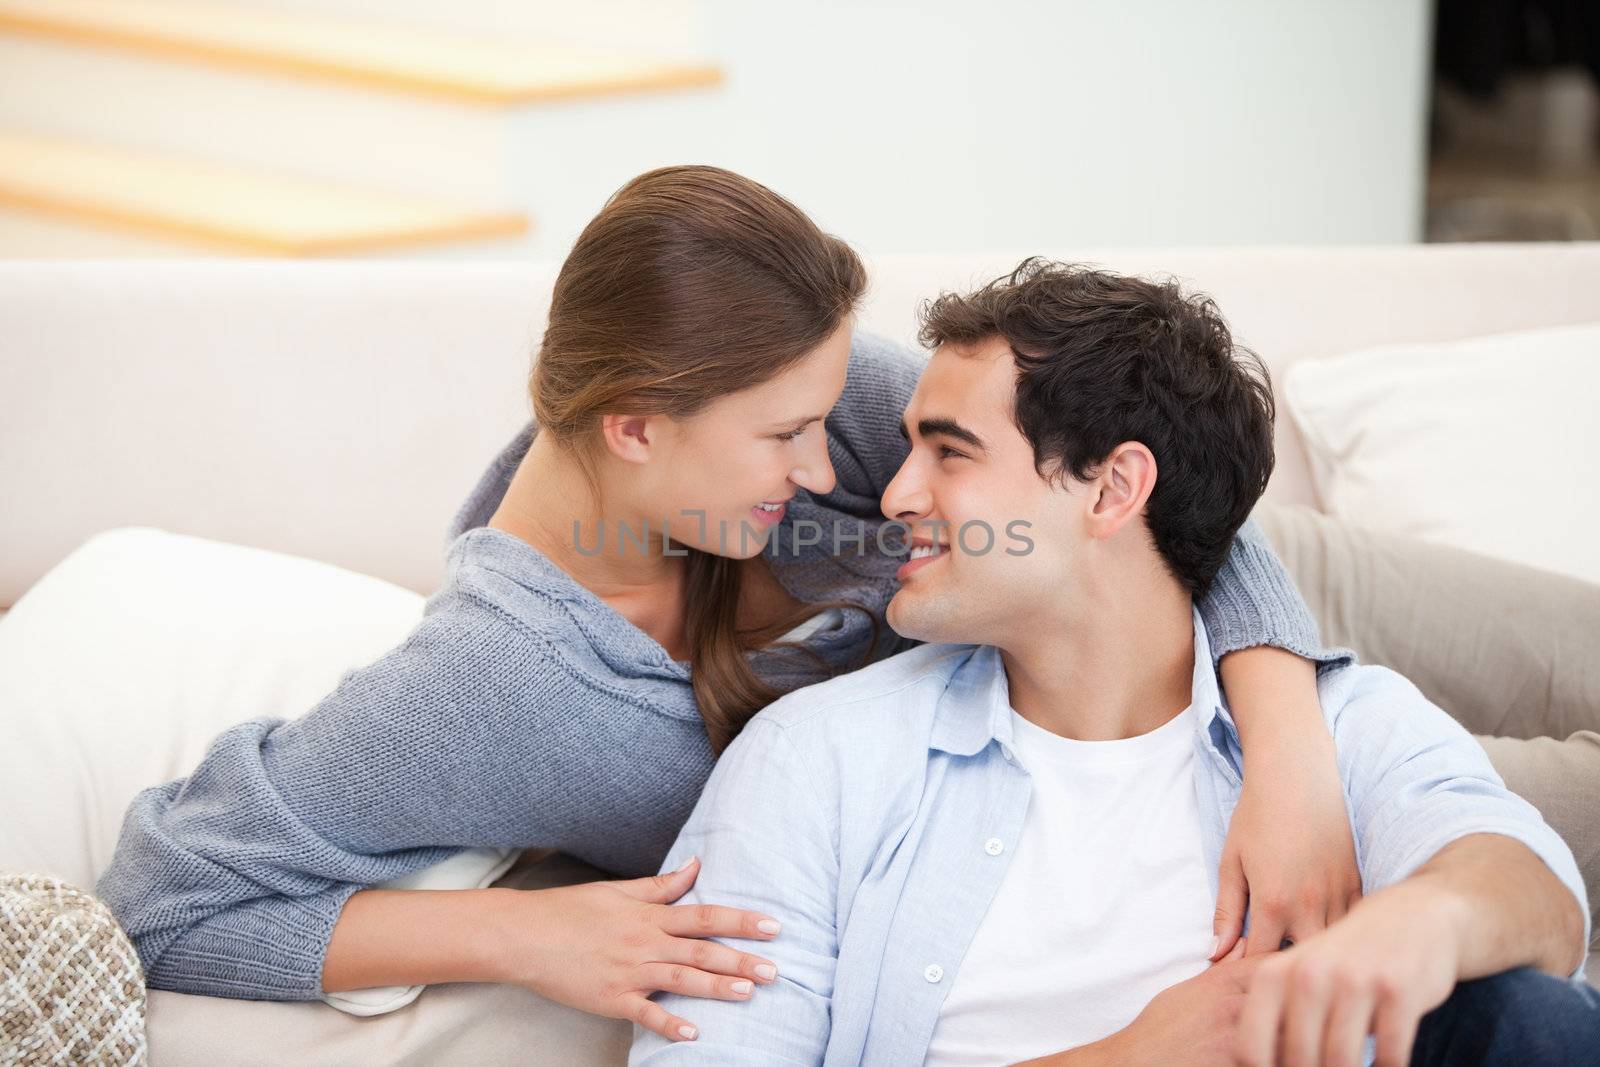 Couple embracing eachother while sitting a sofa in a sitting room